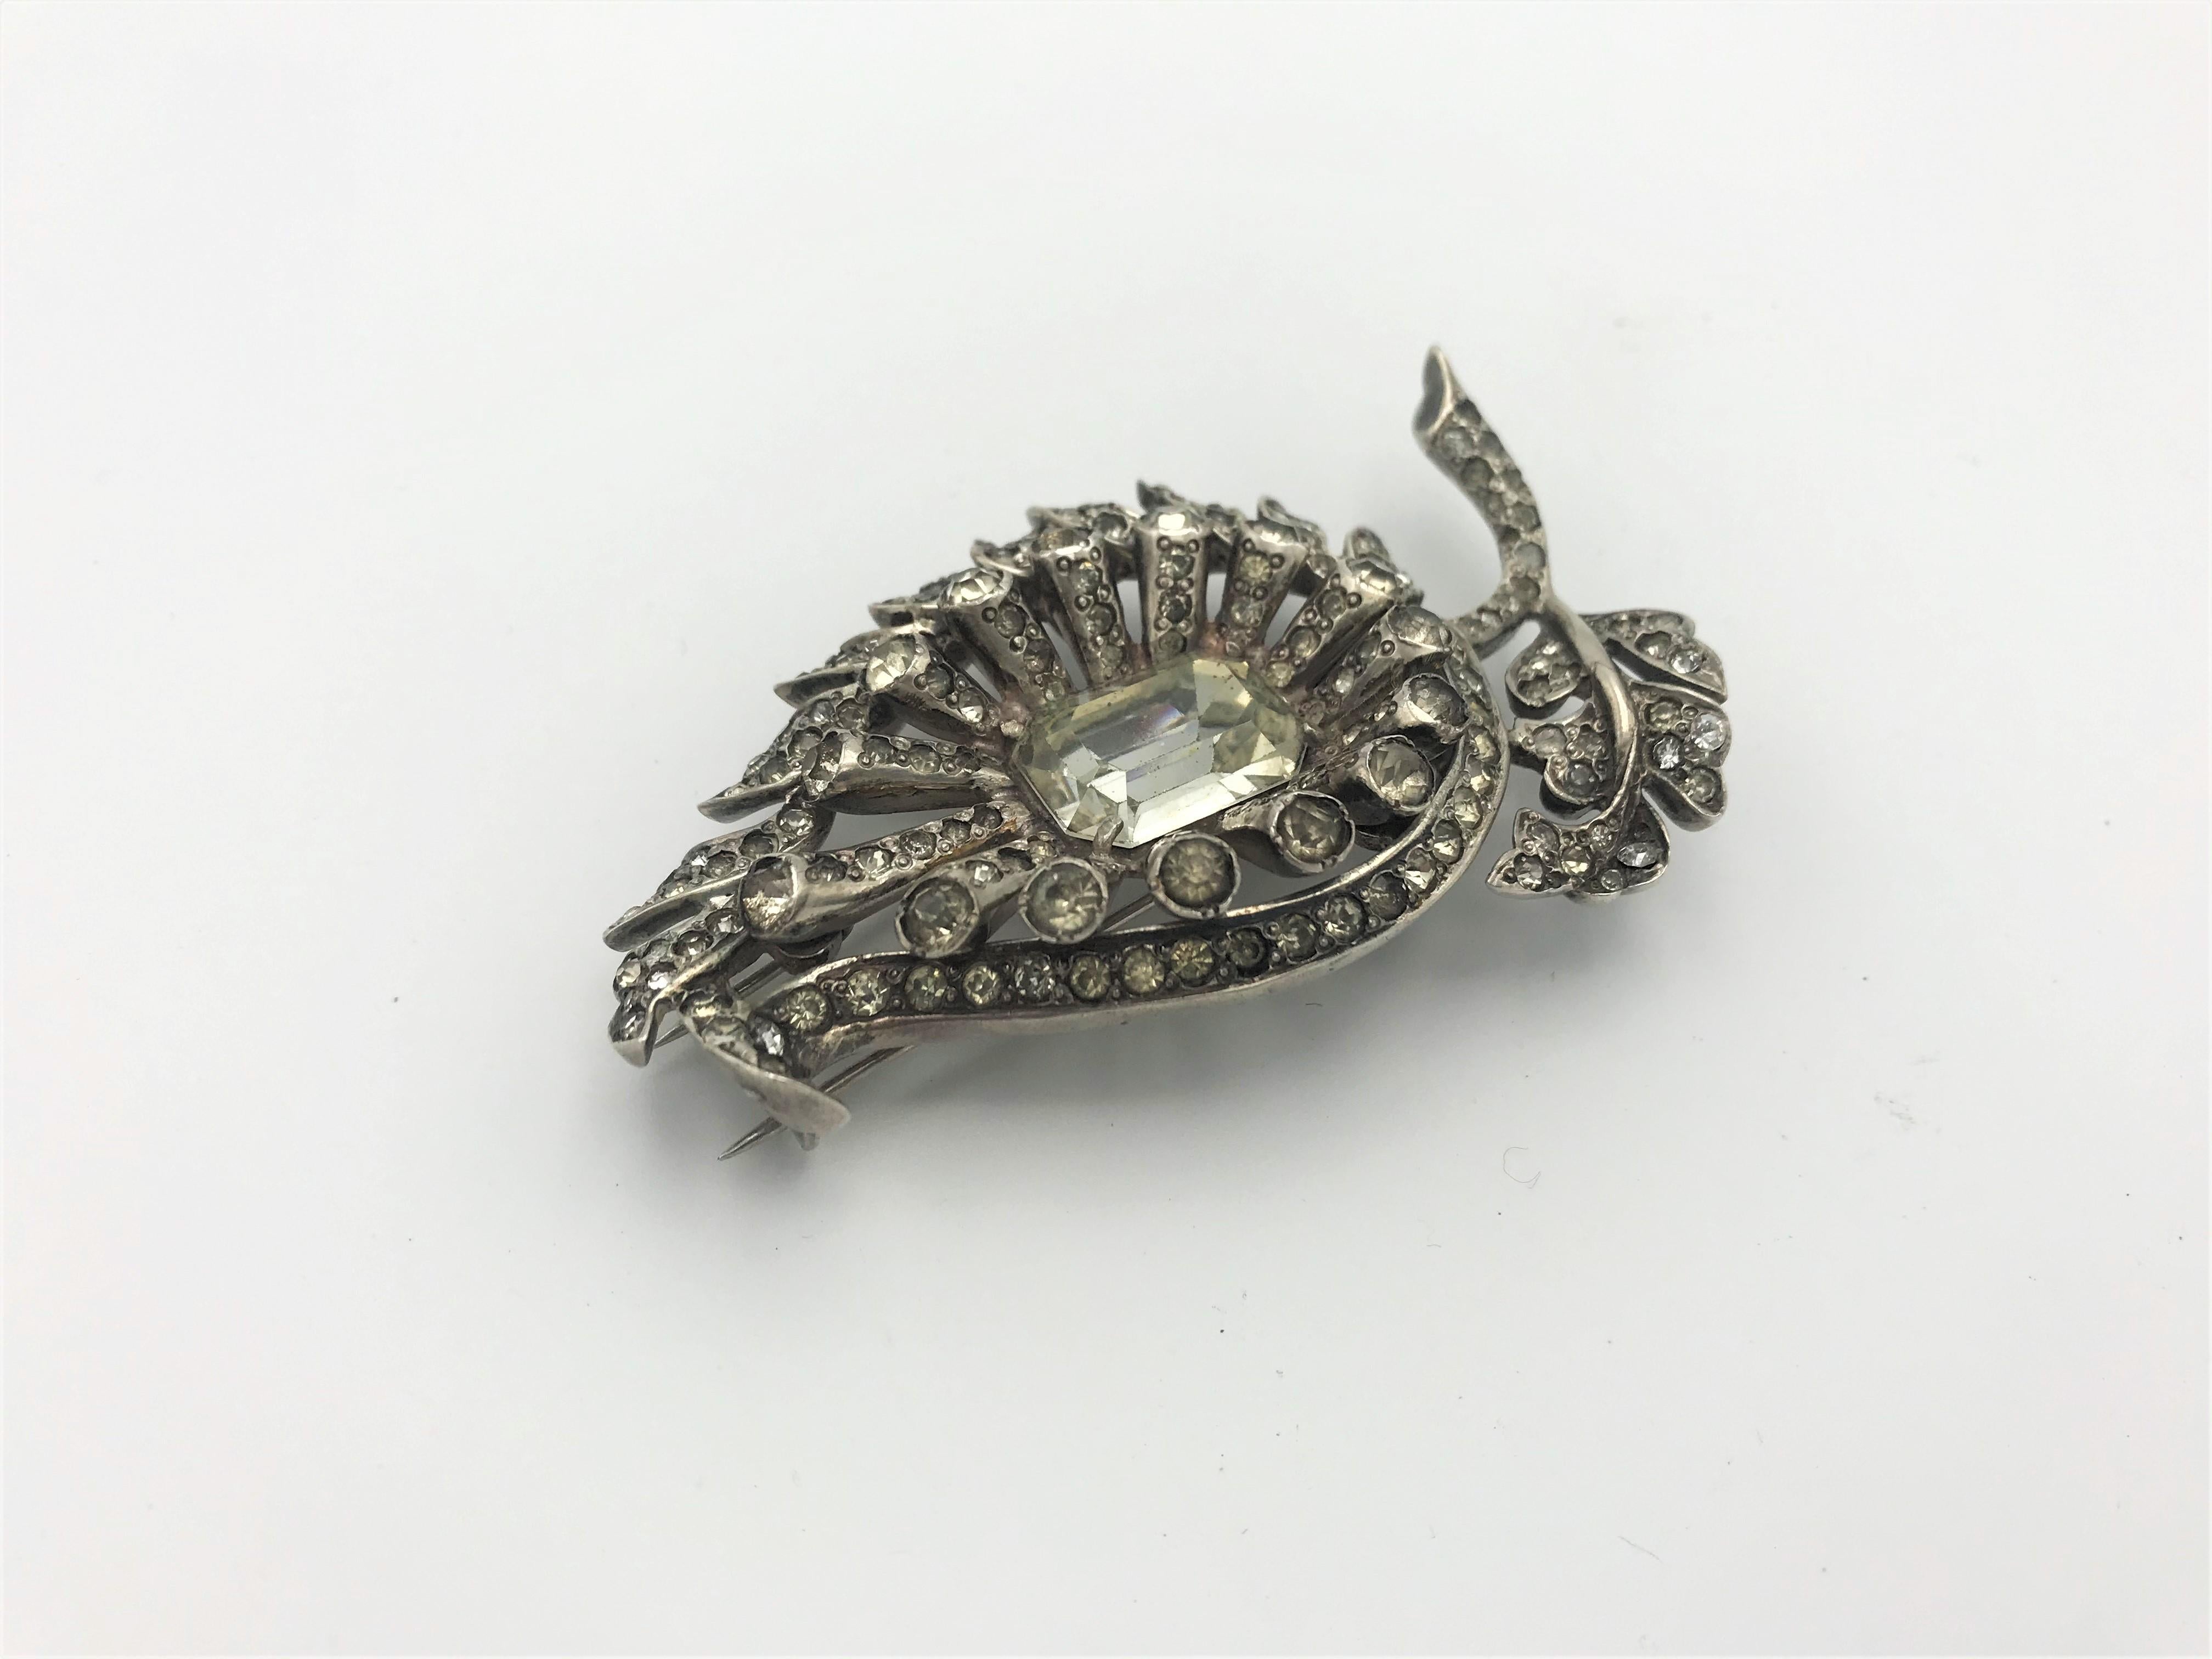 A very early piece by Eisenberg in the shape of a pear with a leaf by. Very three-dimensional worked with a lot of rhinestones and a large cut rhinestone by Swarovski in the middle. The cloth clip is made of sterling und signed EISENBERG and